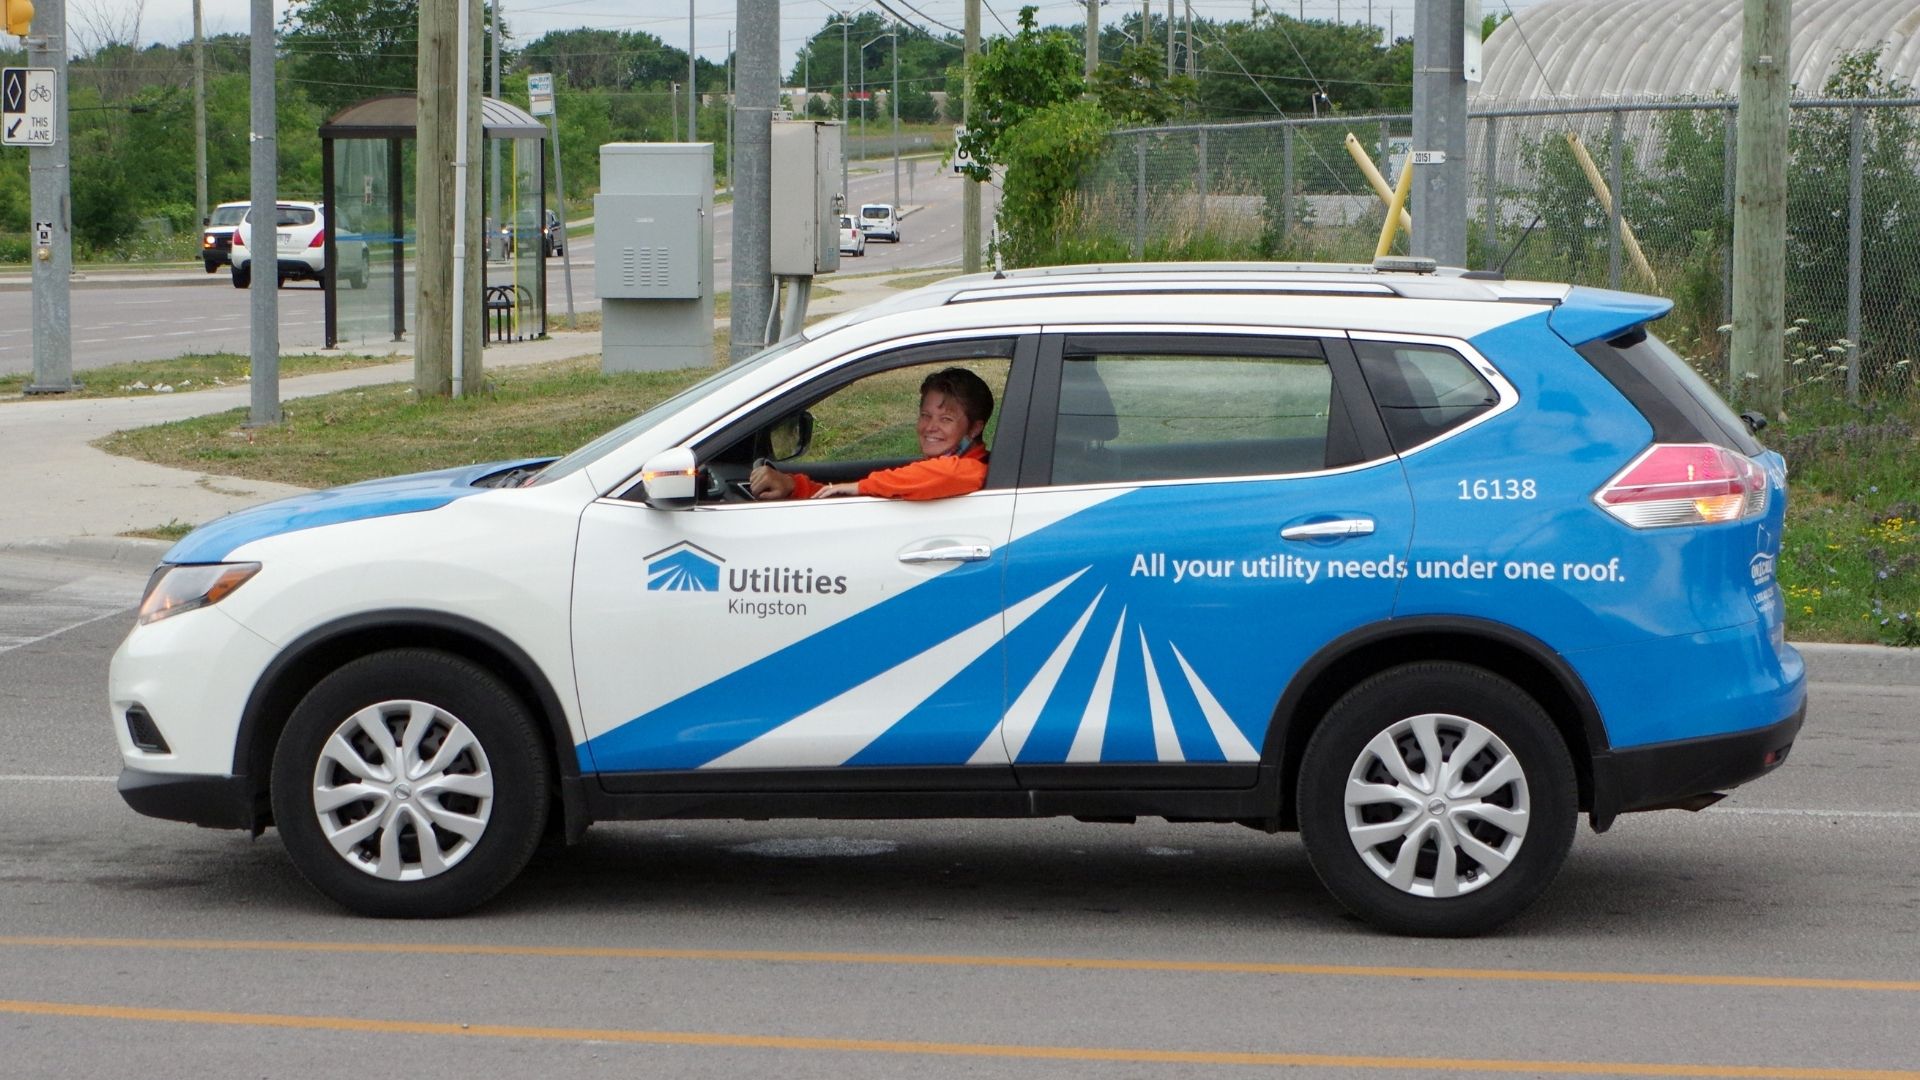 Employee driving in a utilities vehicle.